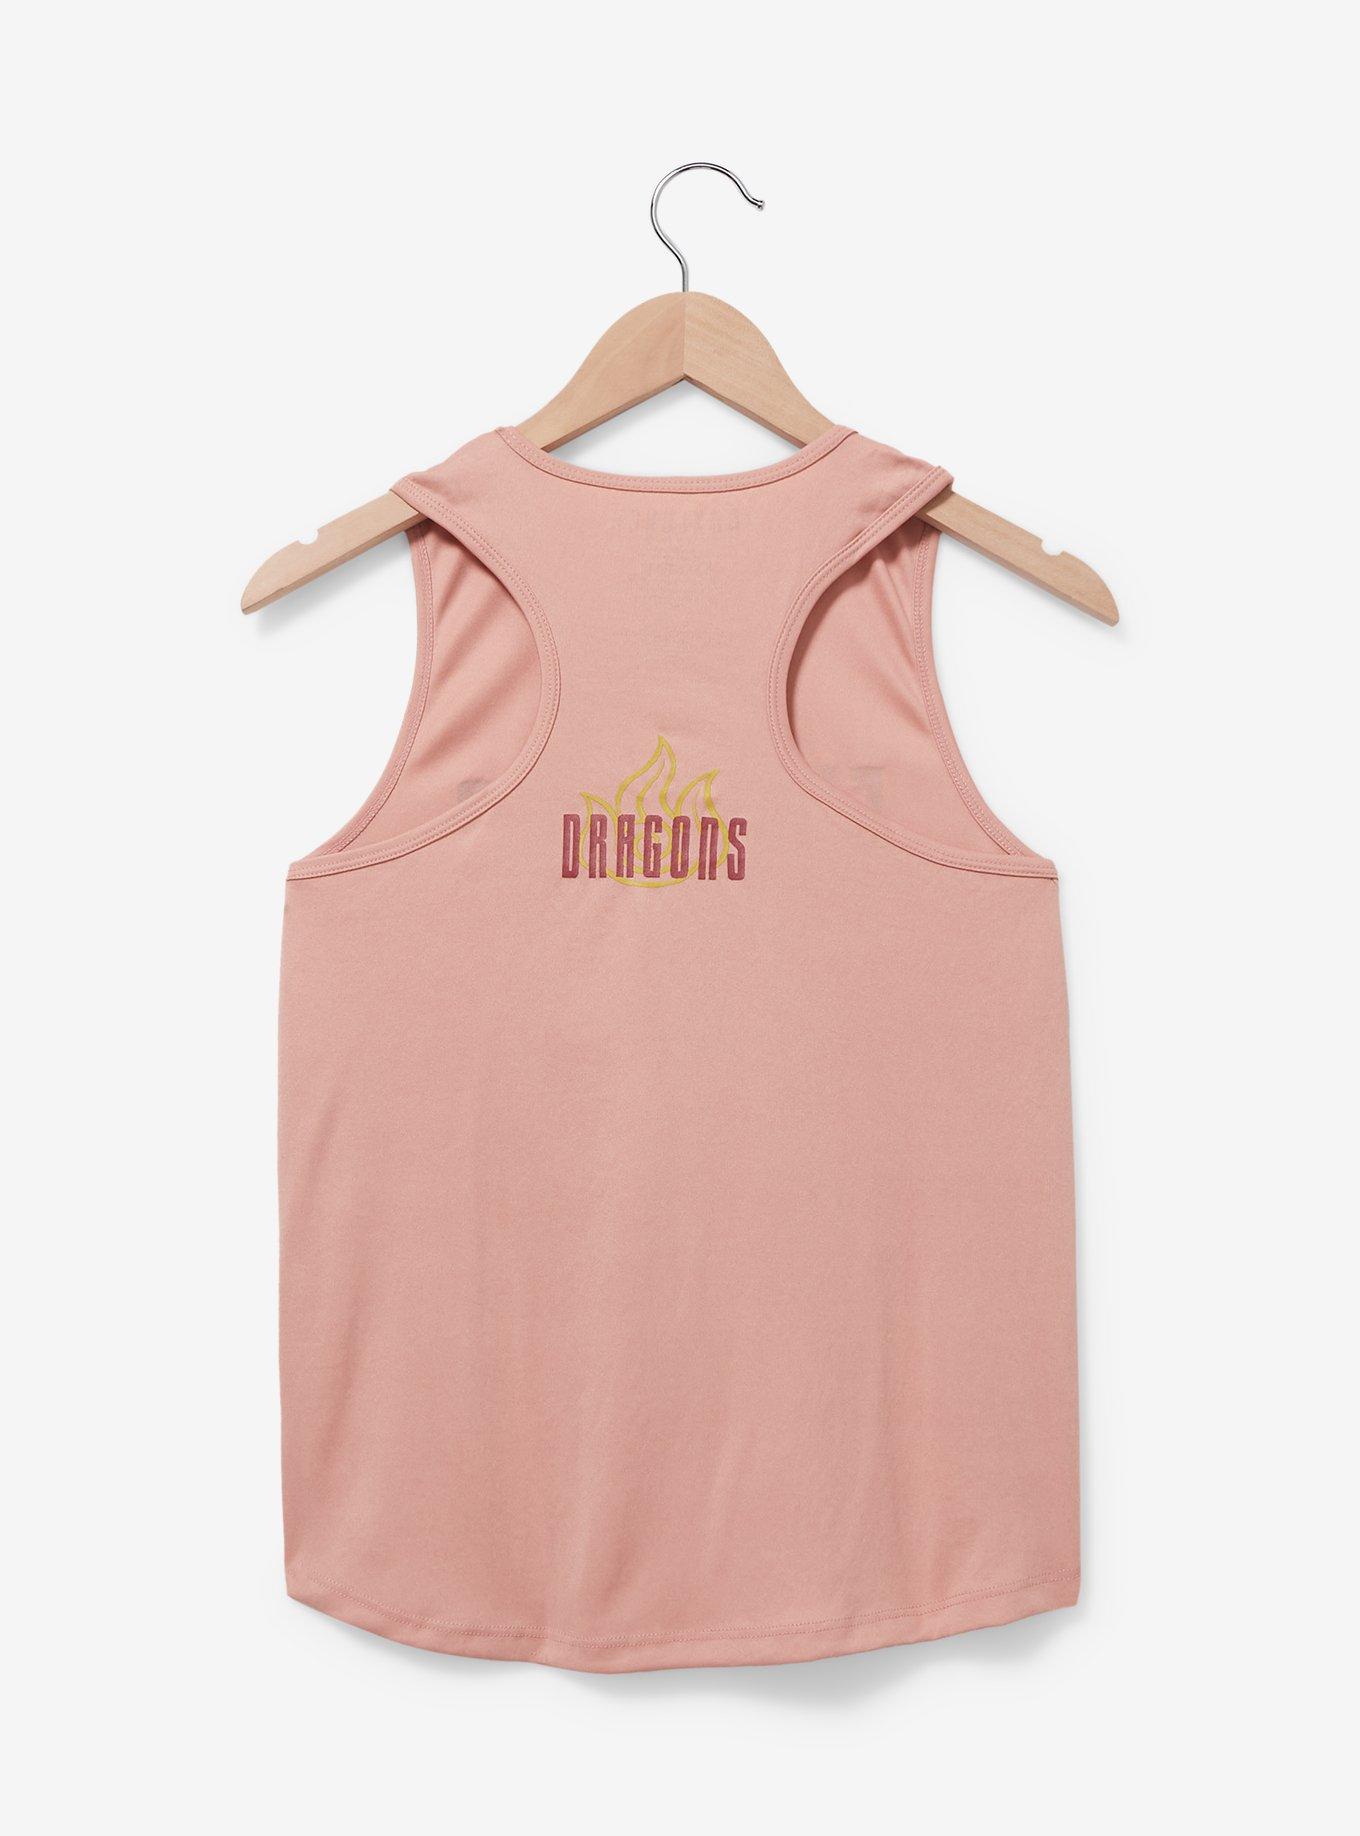 Avatar: The Last Airbender Fire Nation Women's Tank Top — BoxLunch Exclusive, , hi-res